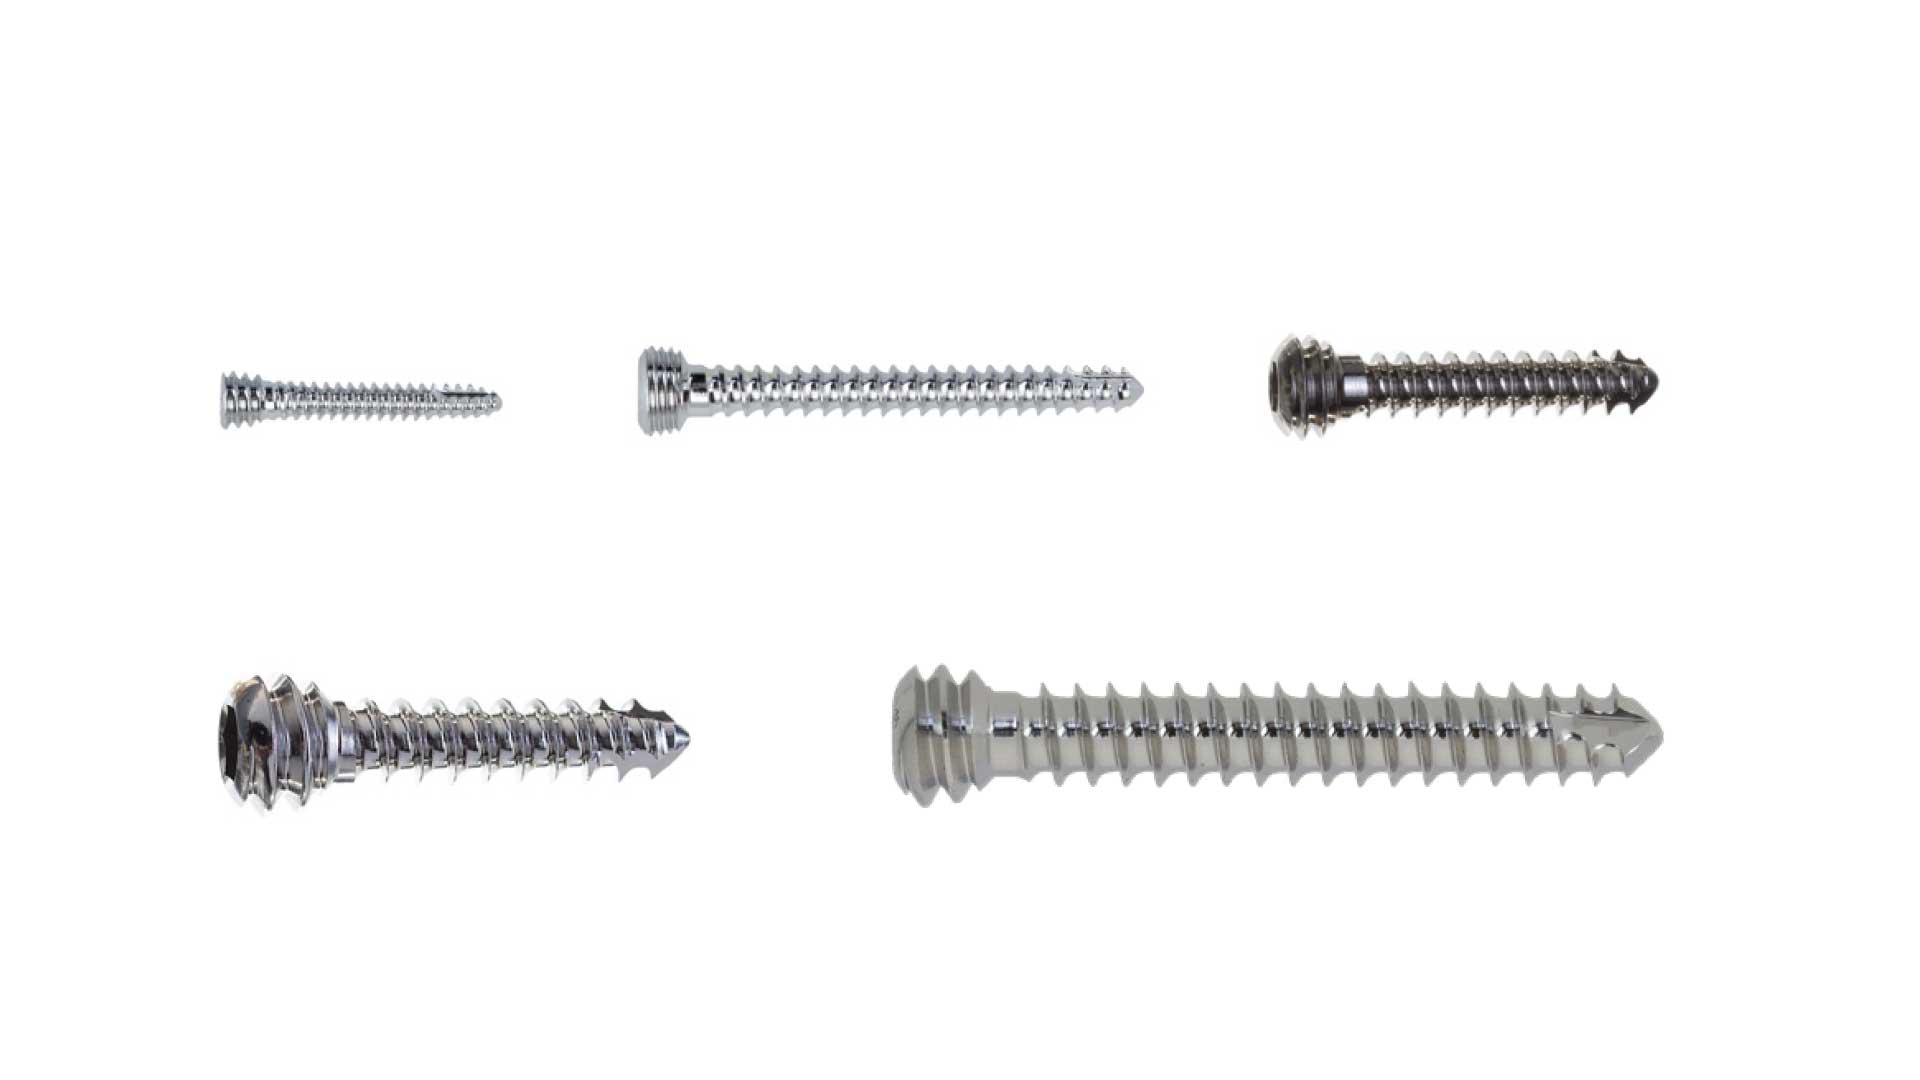 Königsee Implantate Products: Cortical screw angle-stable; stainless steel, category Screws